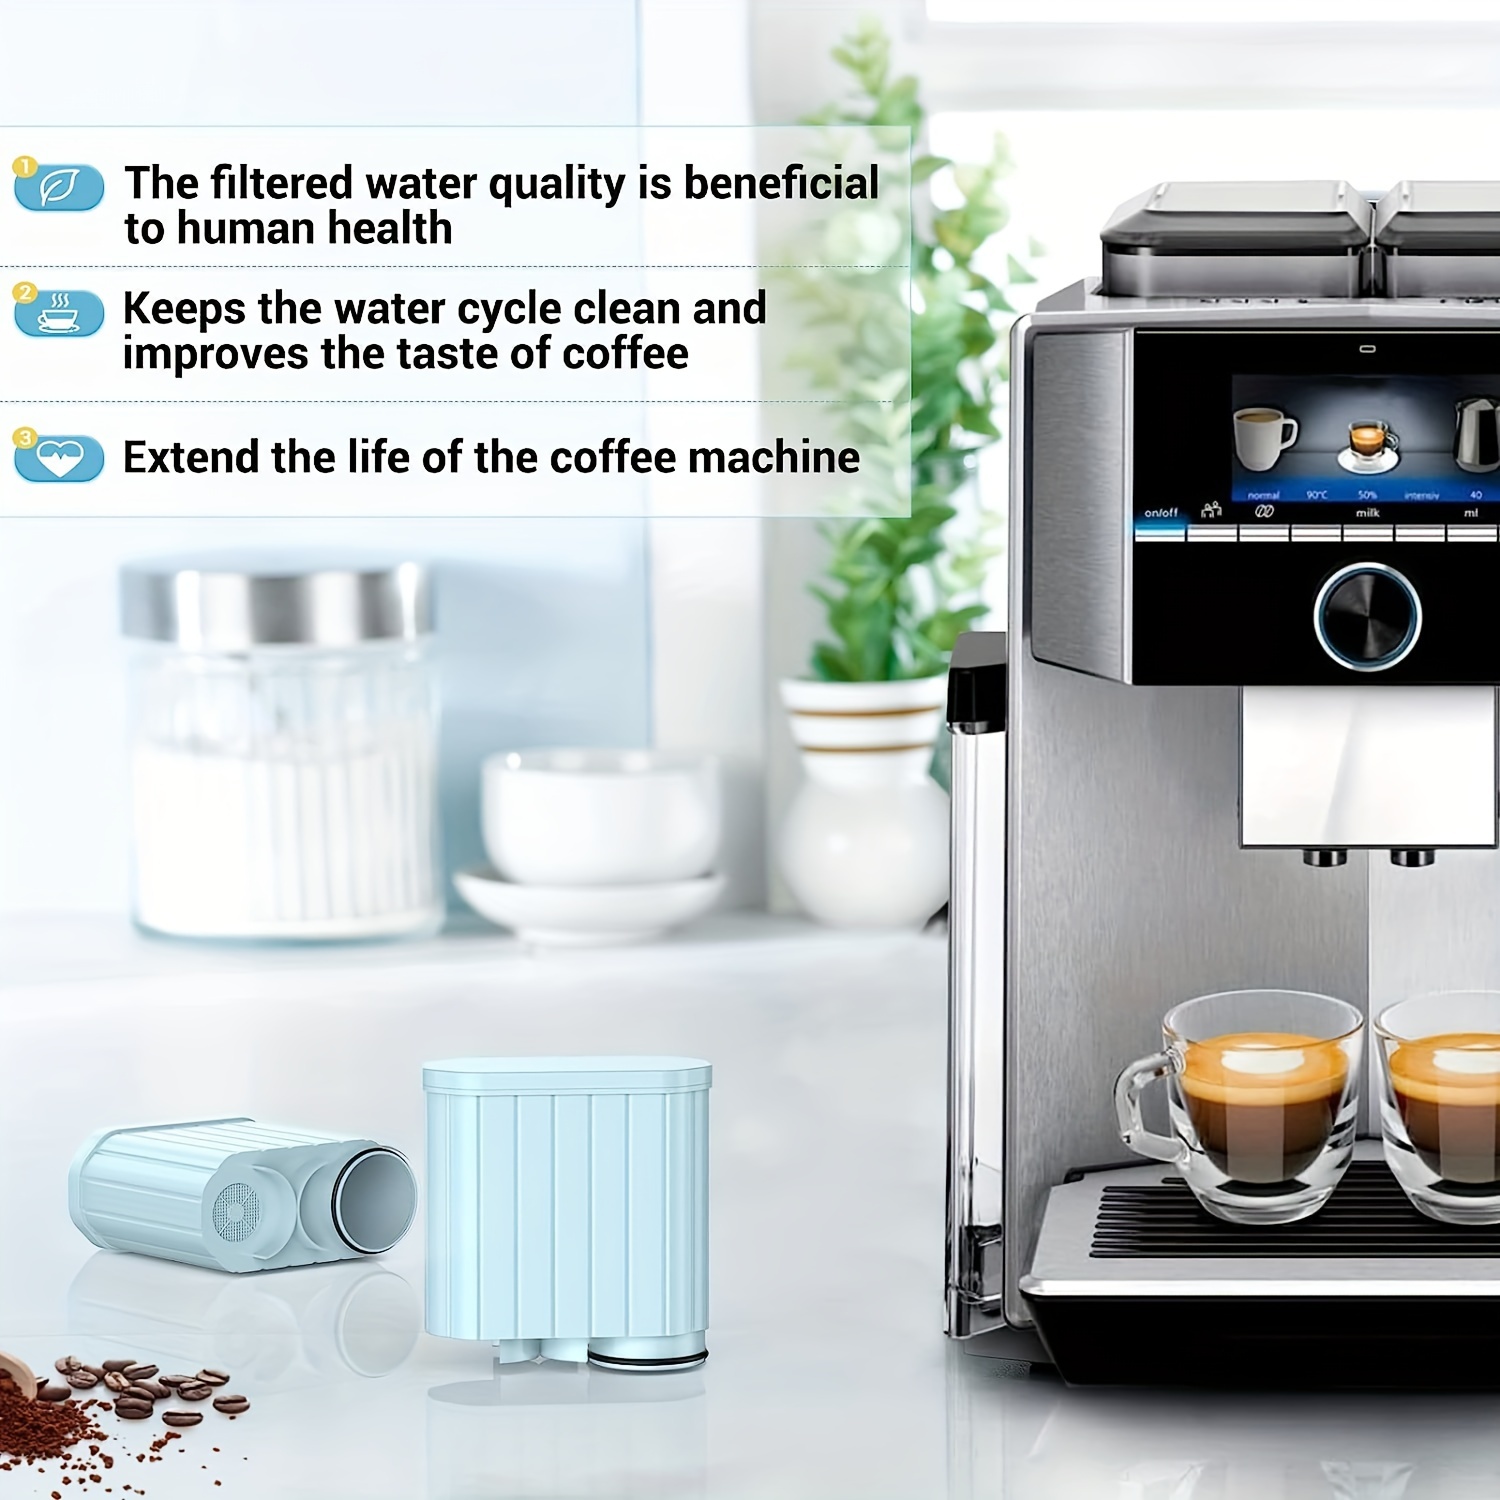 How do I put the AquaClean water filter in my Philips coffee